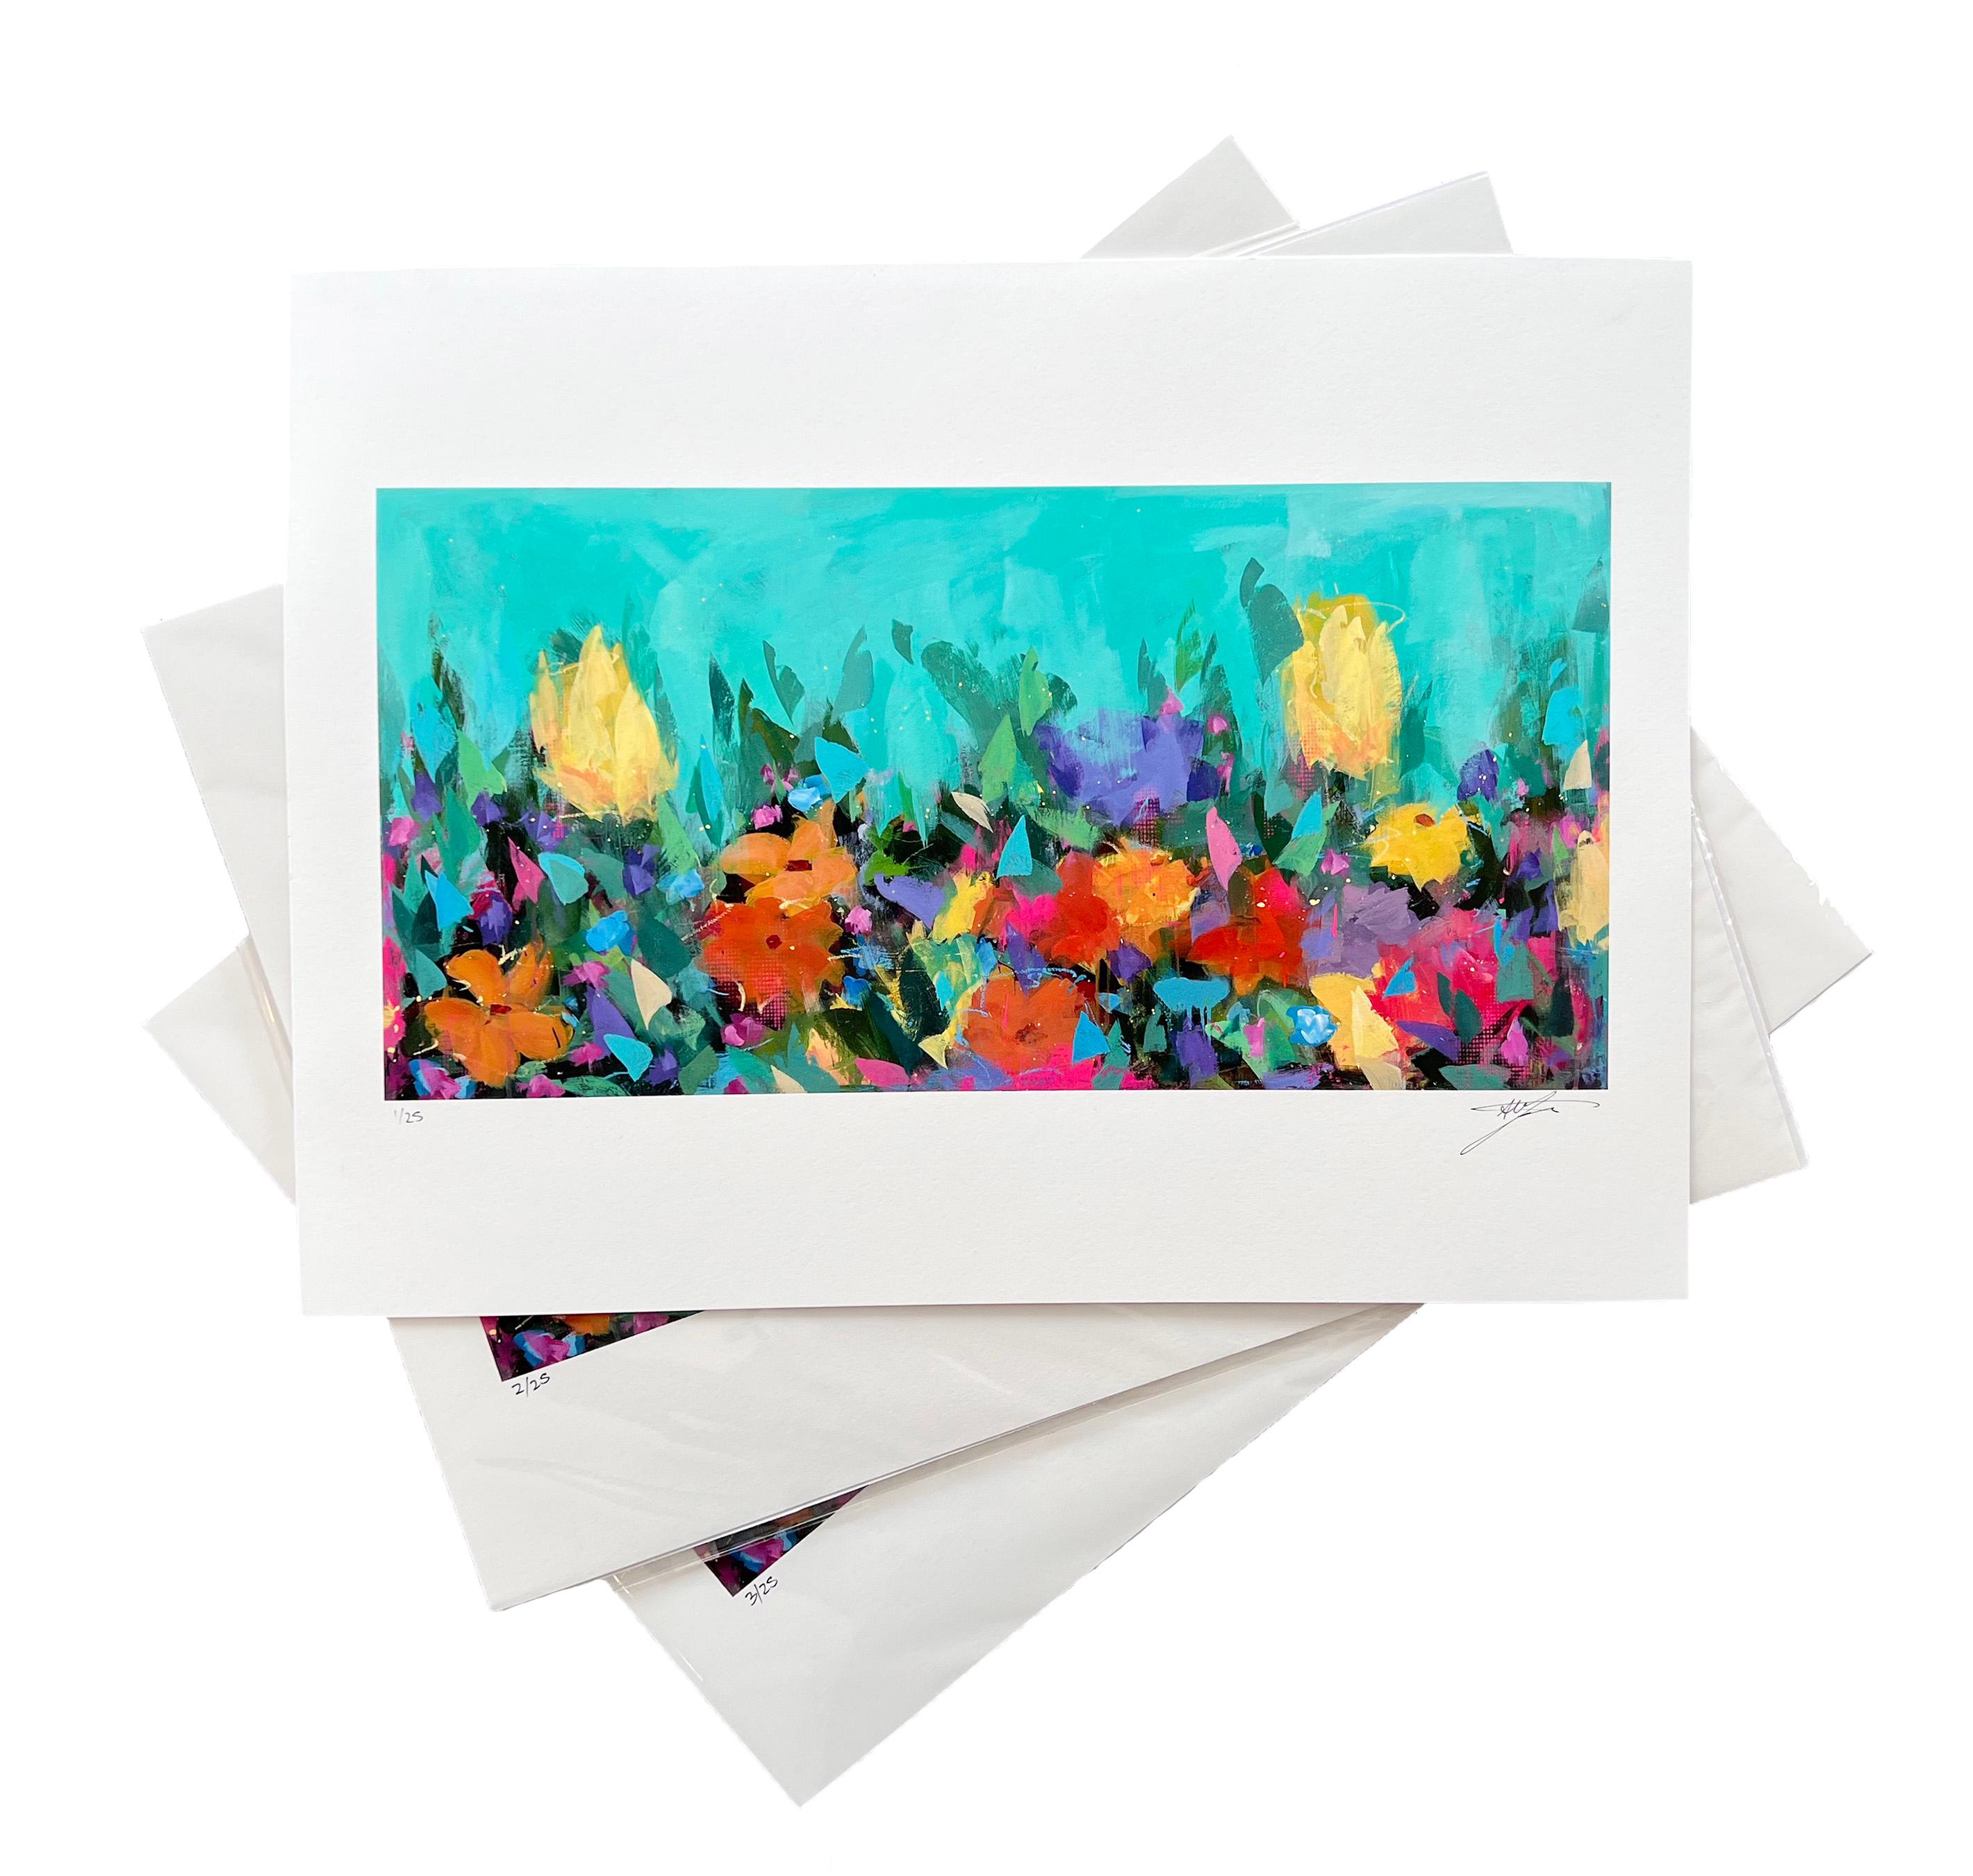 'Flow of Energy Fine Art Print' is an impressionist floral print by urban impressionist painter Steve Javiel. It measures 12 x 16 inches. This piece is part of a limited edition collection, with only 25 copies available. Each copy is individually